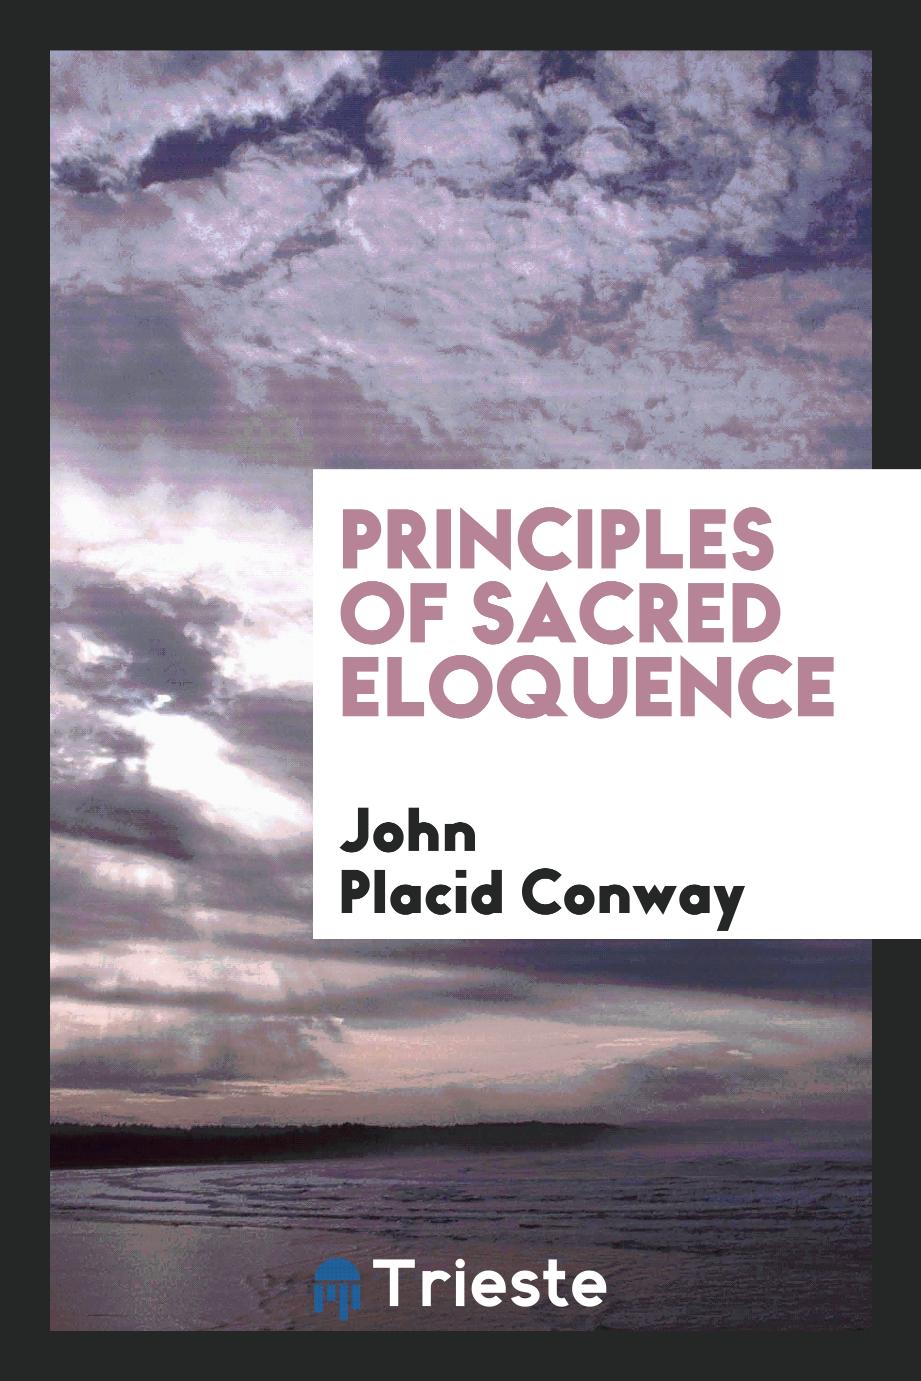 Principles of sacred eloquence